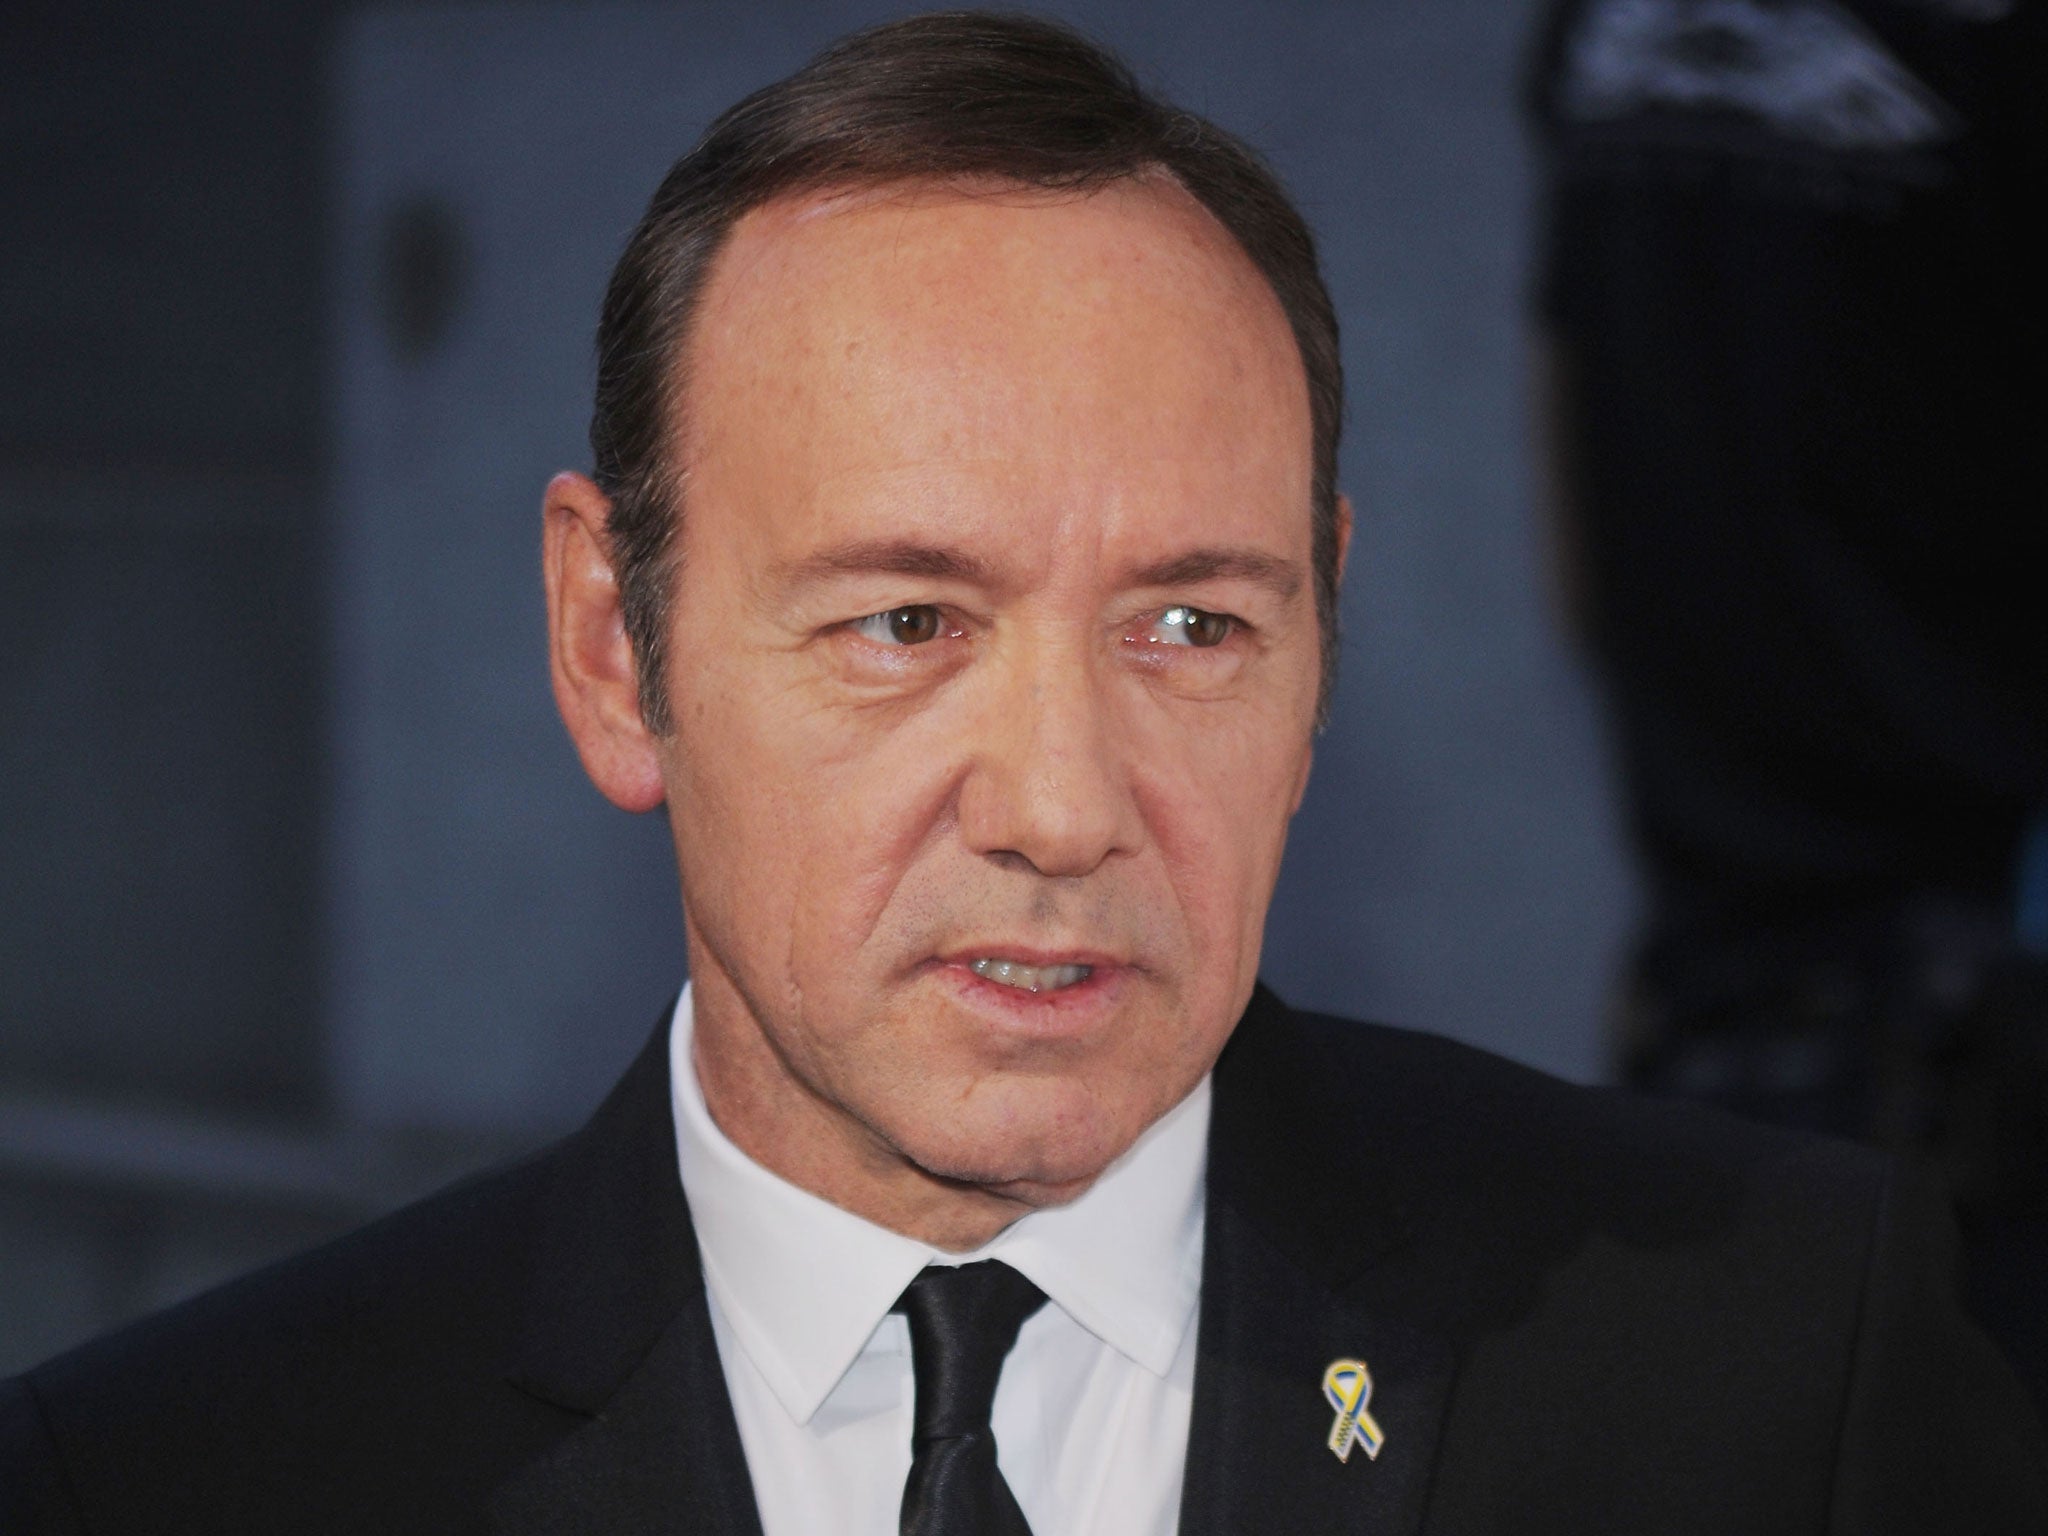 The actor Kevin Spacey provided a character reference